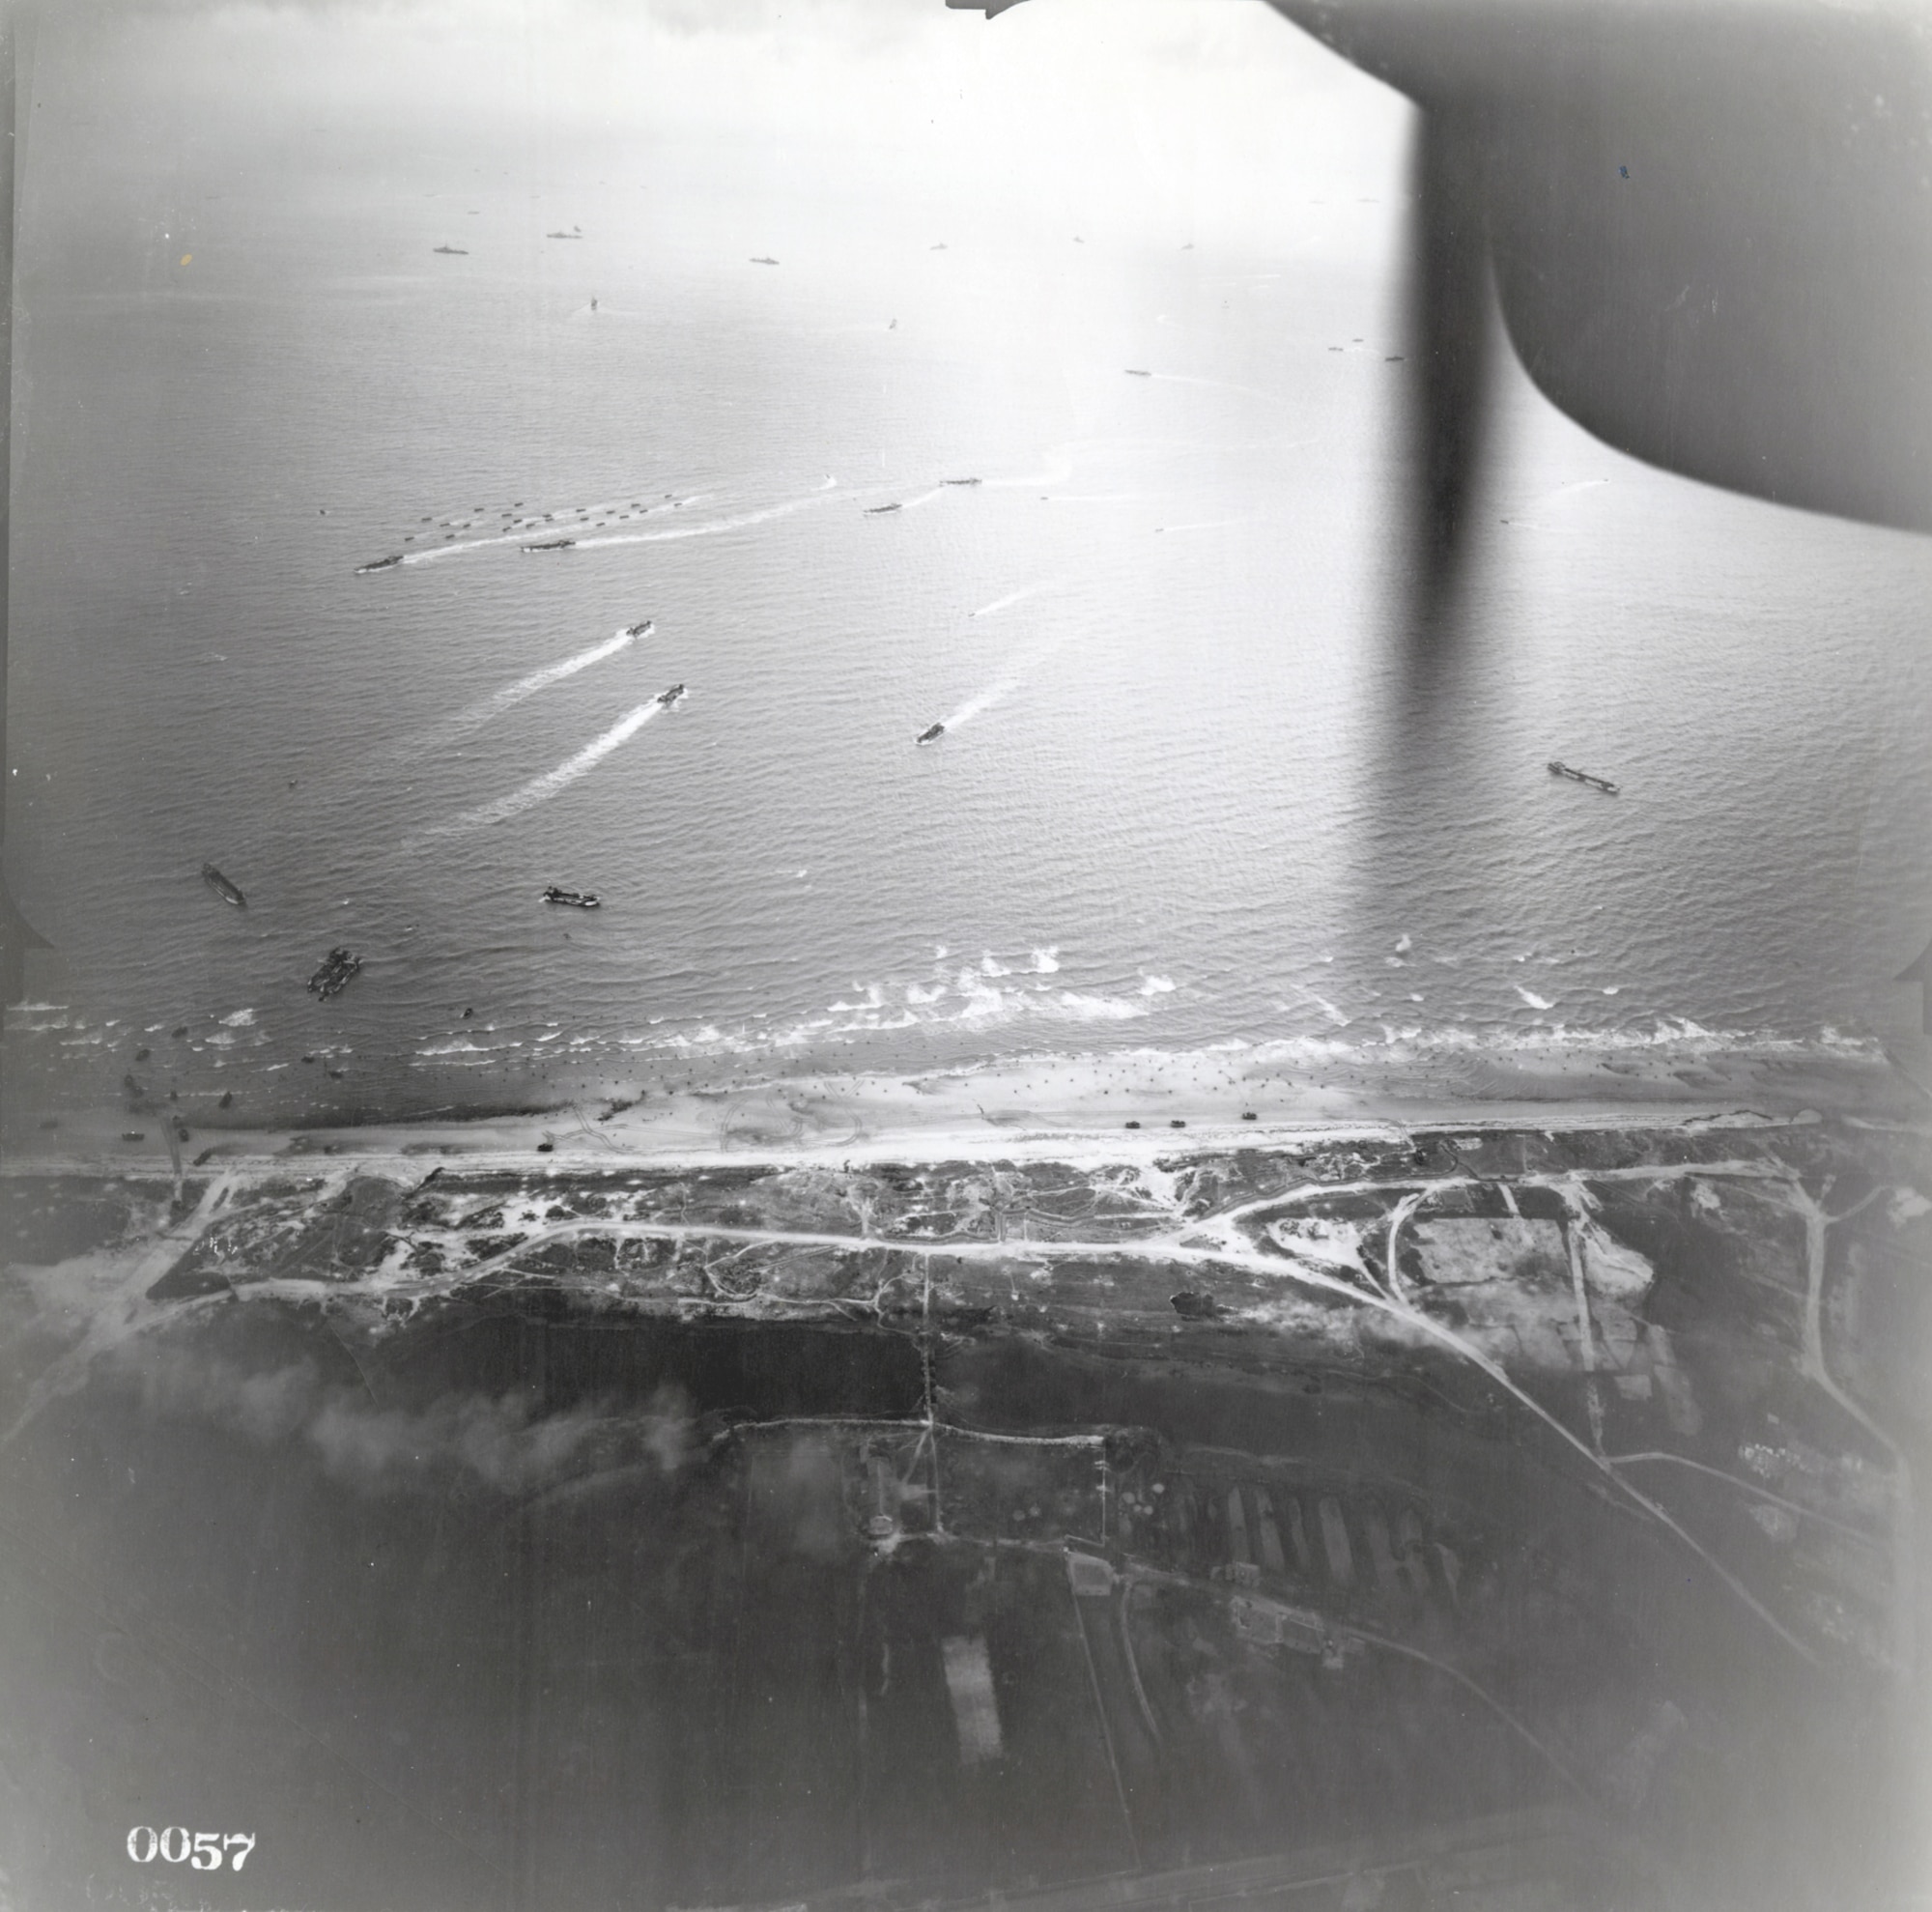 Part of the invasion coast at Normandy. (U.S. Air Force photo)